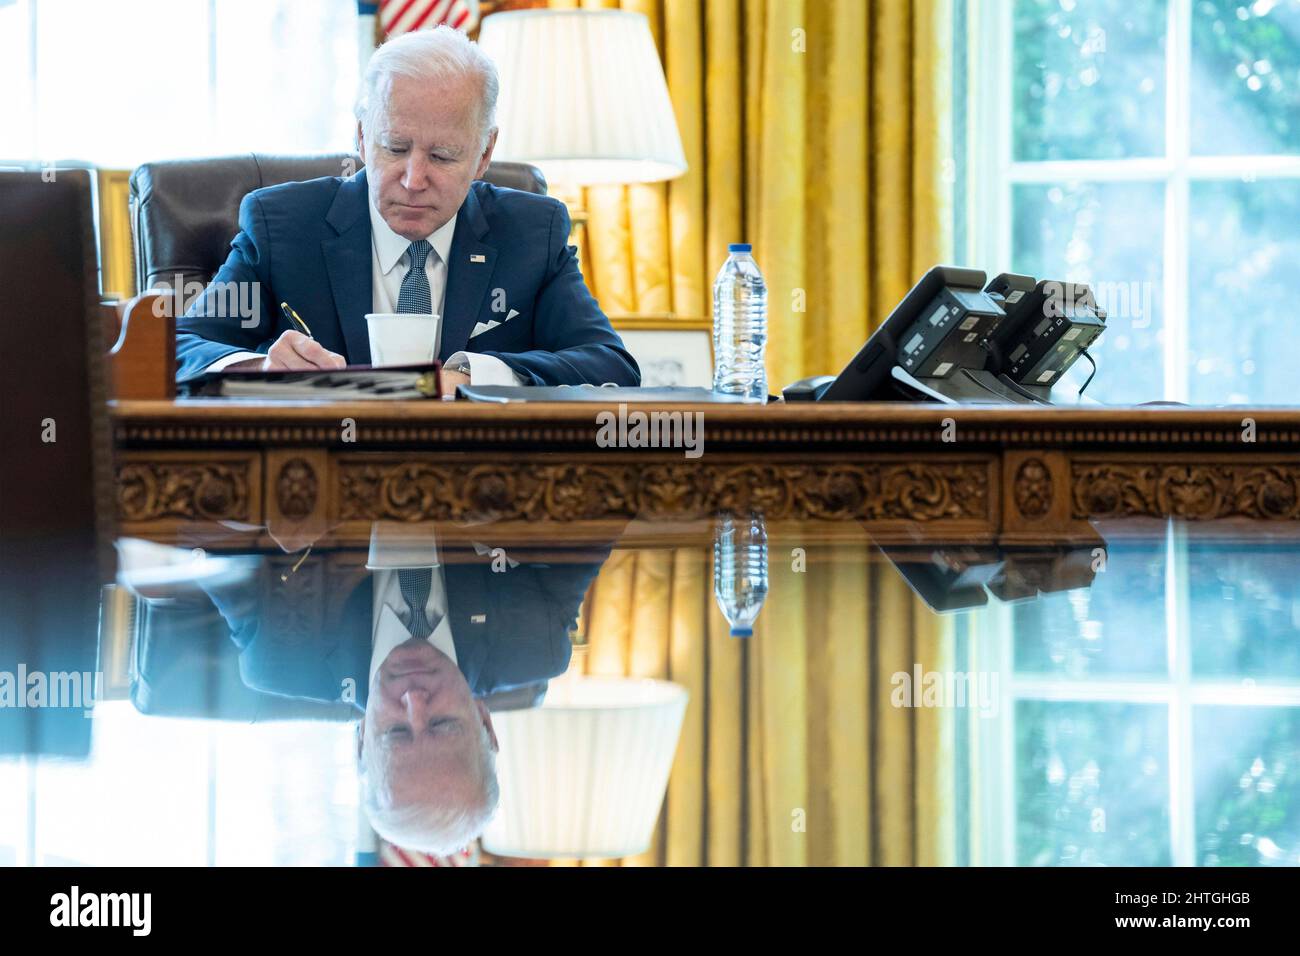 Washington, United States Of America. 28th Feb, 2022. Washington, United States of America. 28 February, 2022. U.S President Joe Biden holds a conference call with NATO allies to discuss the ongoing crisis in Ukraine, from the Oval Office of the White House February 28, 2022 in Washington, DC Credit: Adam Schultz/White House Photo/Alamy Live News Stock Photo